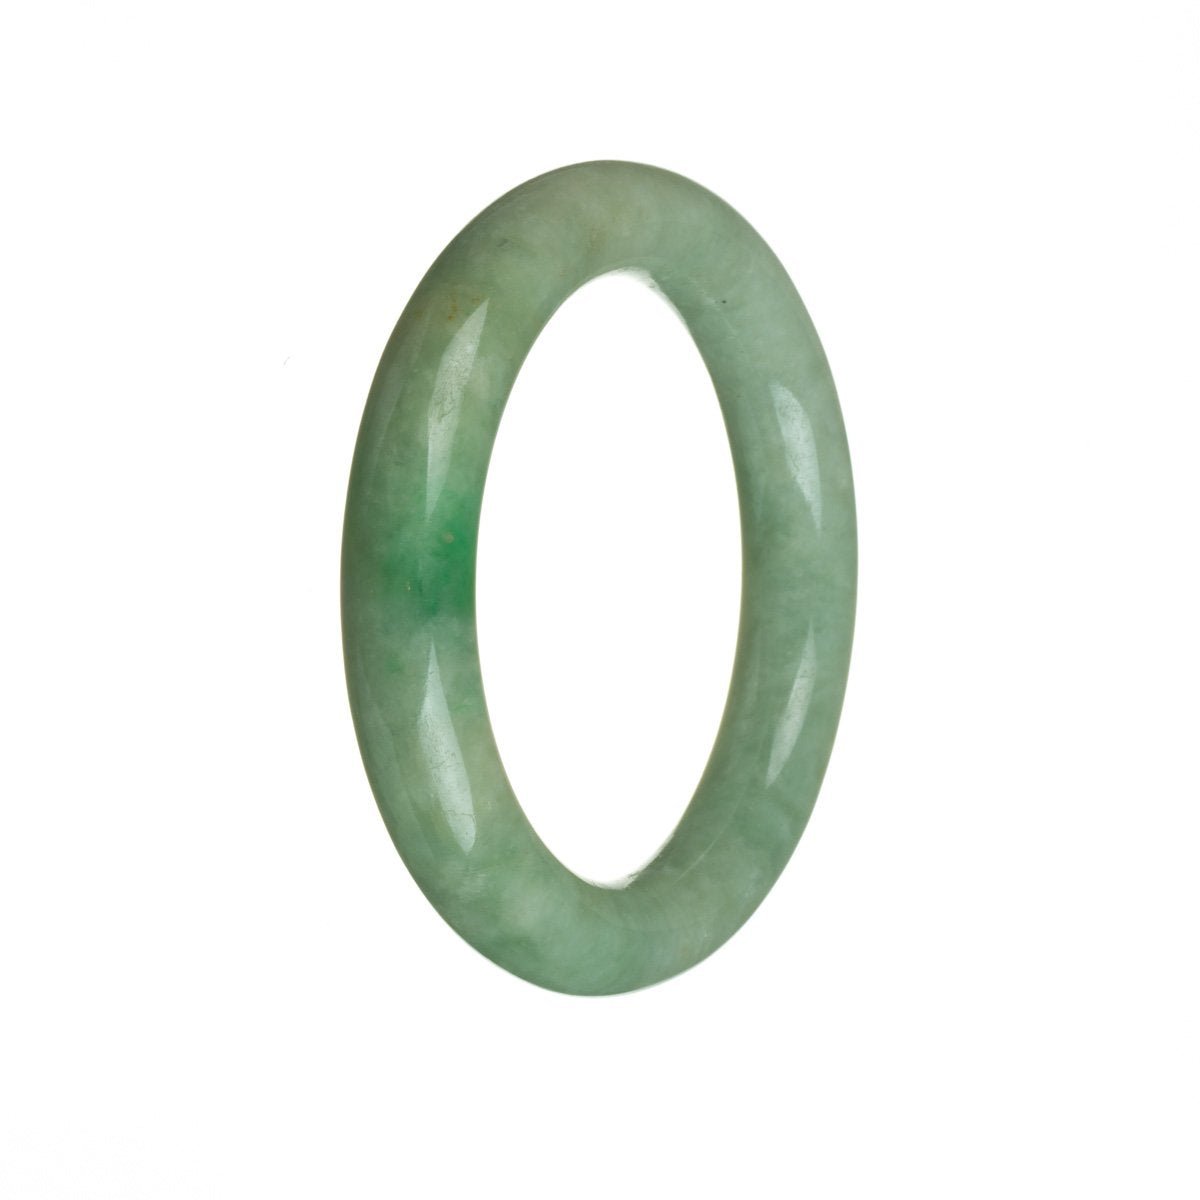 A round emerald green Jadeite bangle bracelet with a natural and vibrant green color.